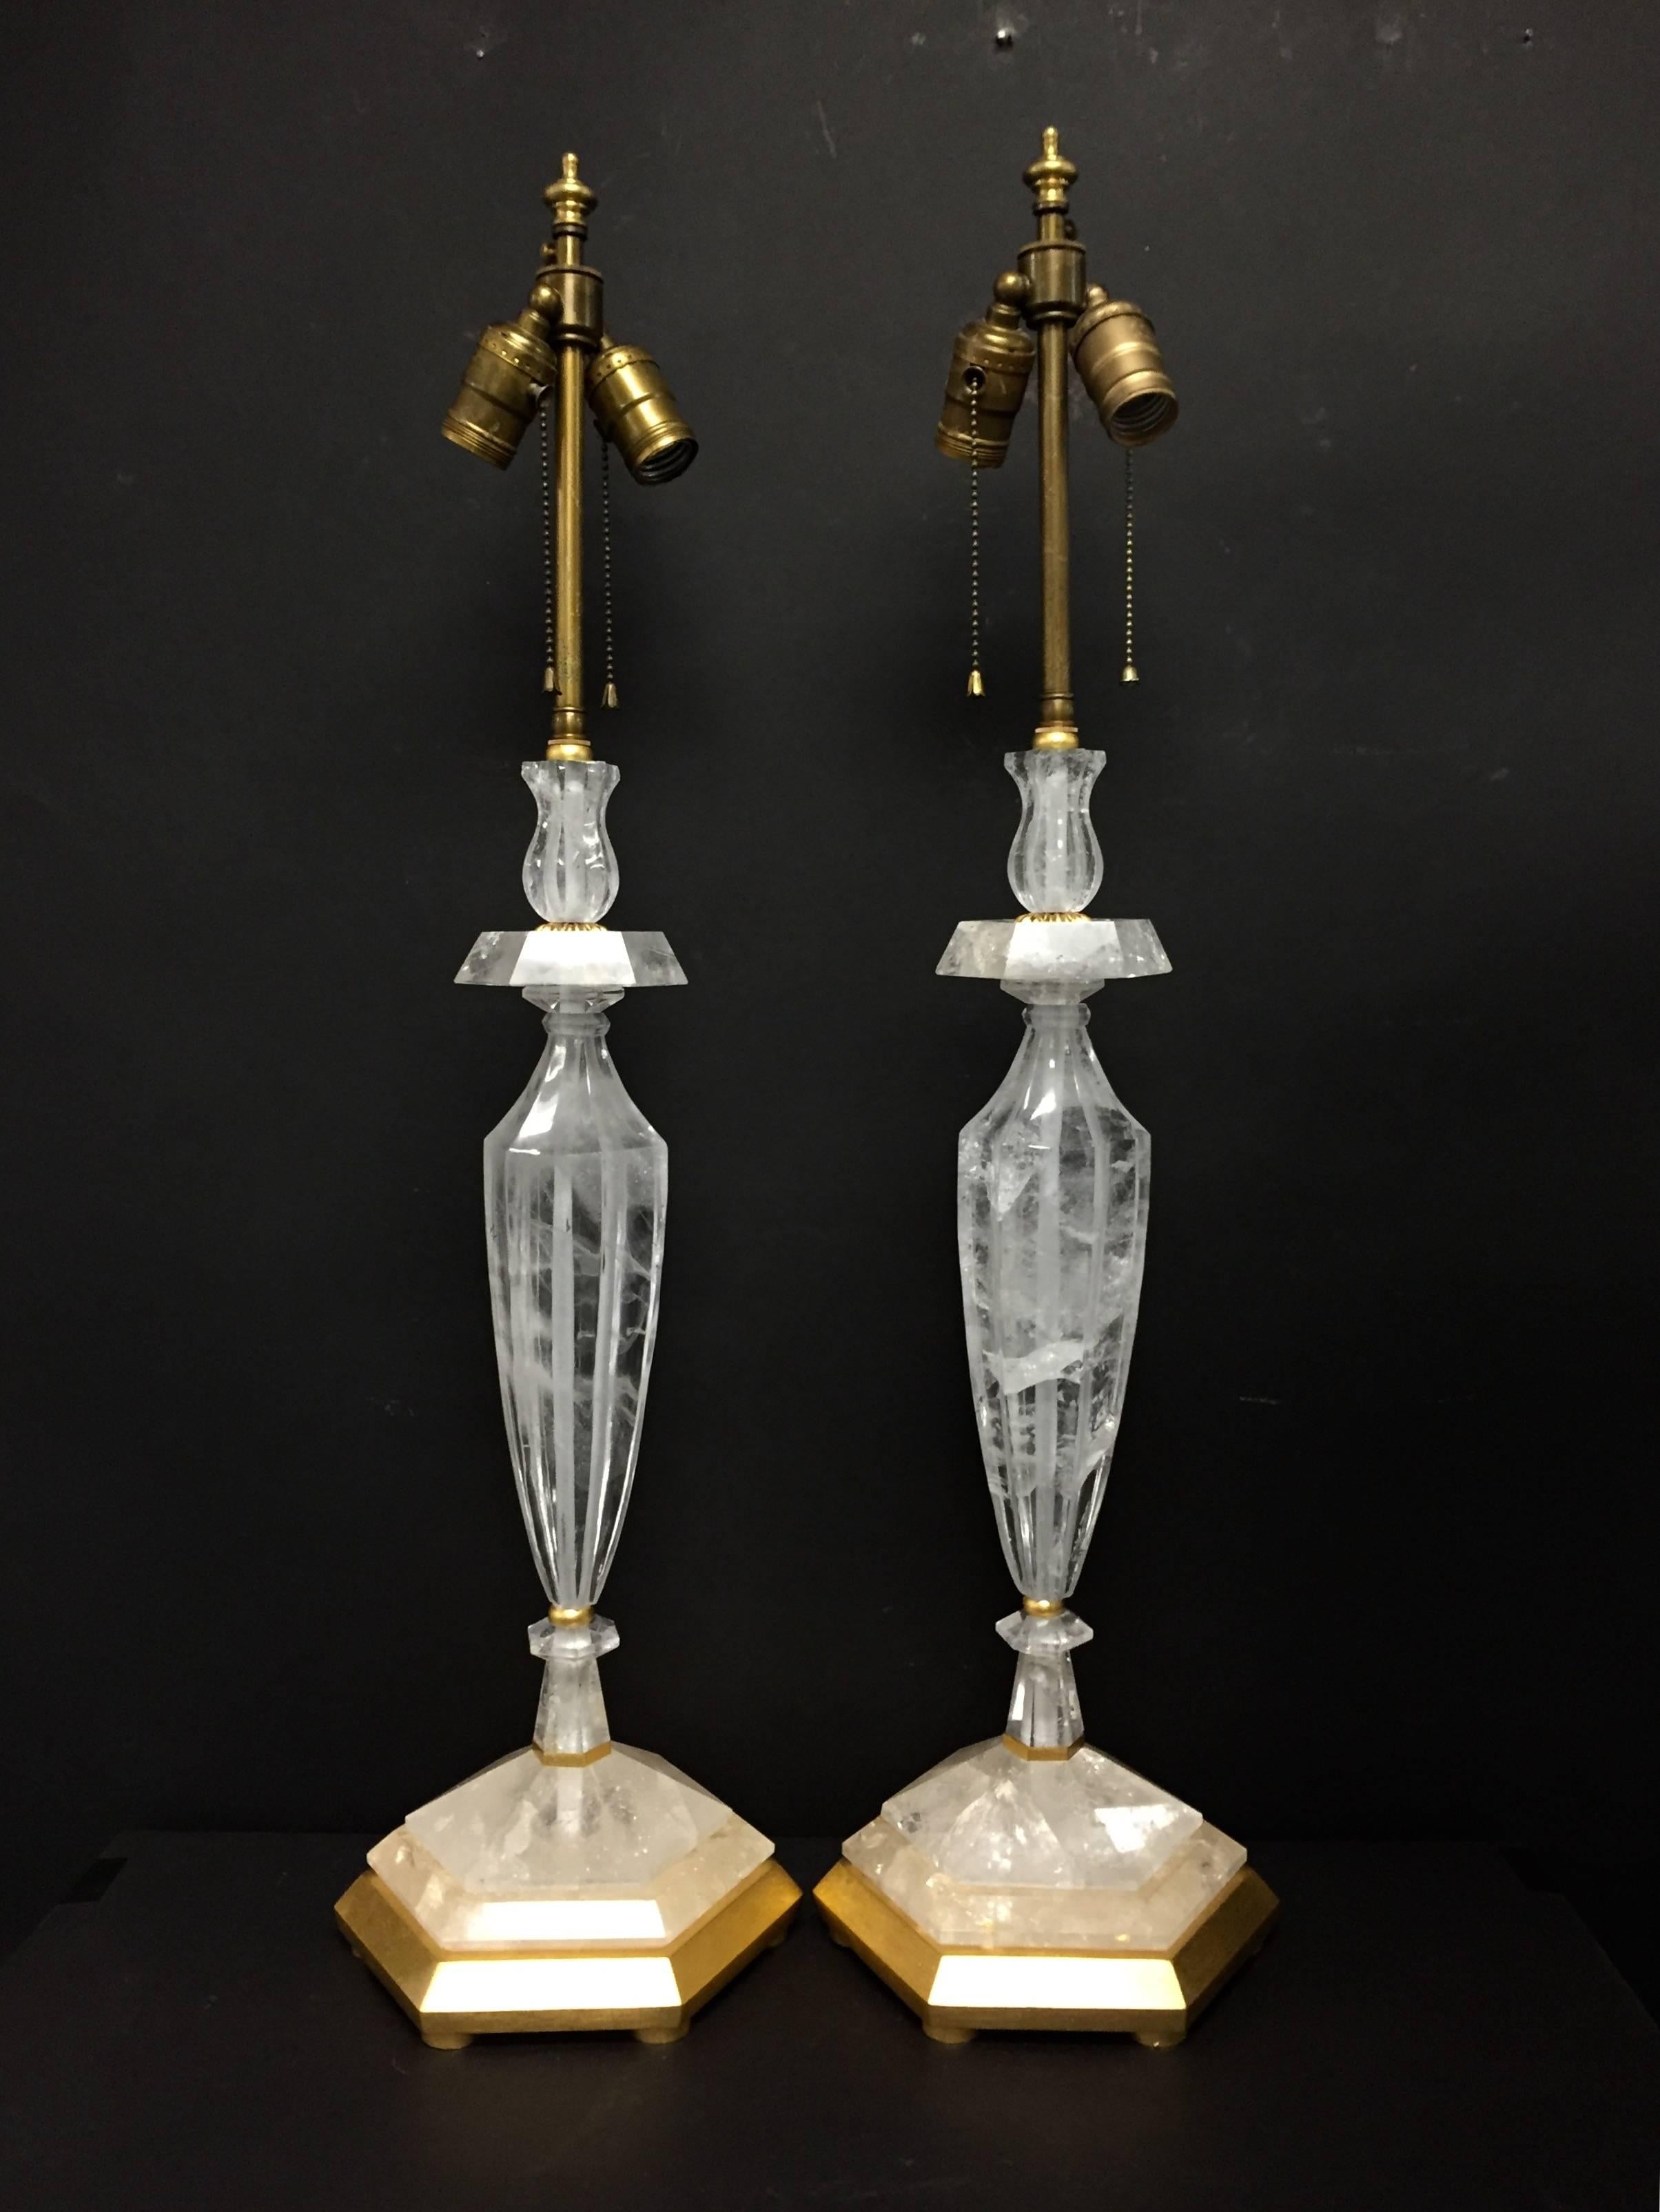 This pair of giltwood and rock crystal lamps are beautifully fluted in an elongated urn shape. Each piece of rock crystal is highlighted with gilt accents.
The lamps are topped with double lights and measure a tall 32" in height.

Measures: